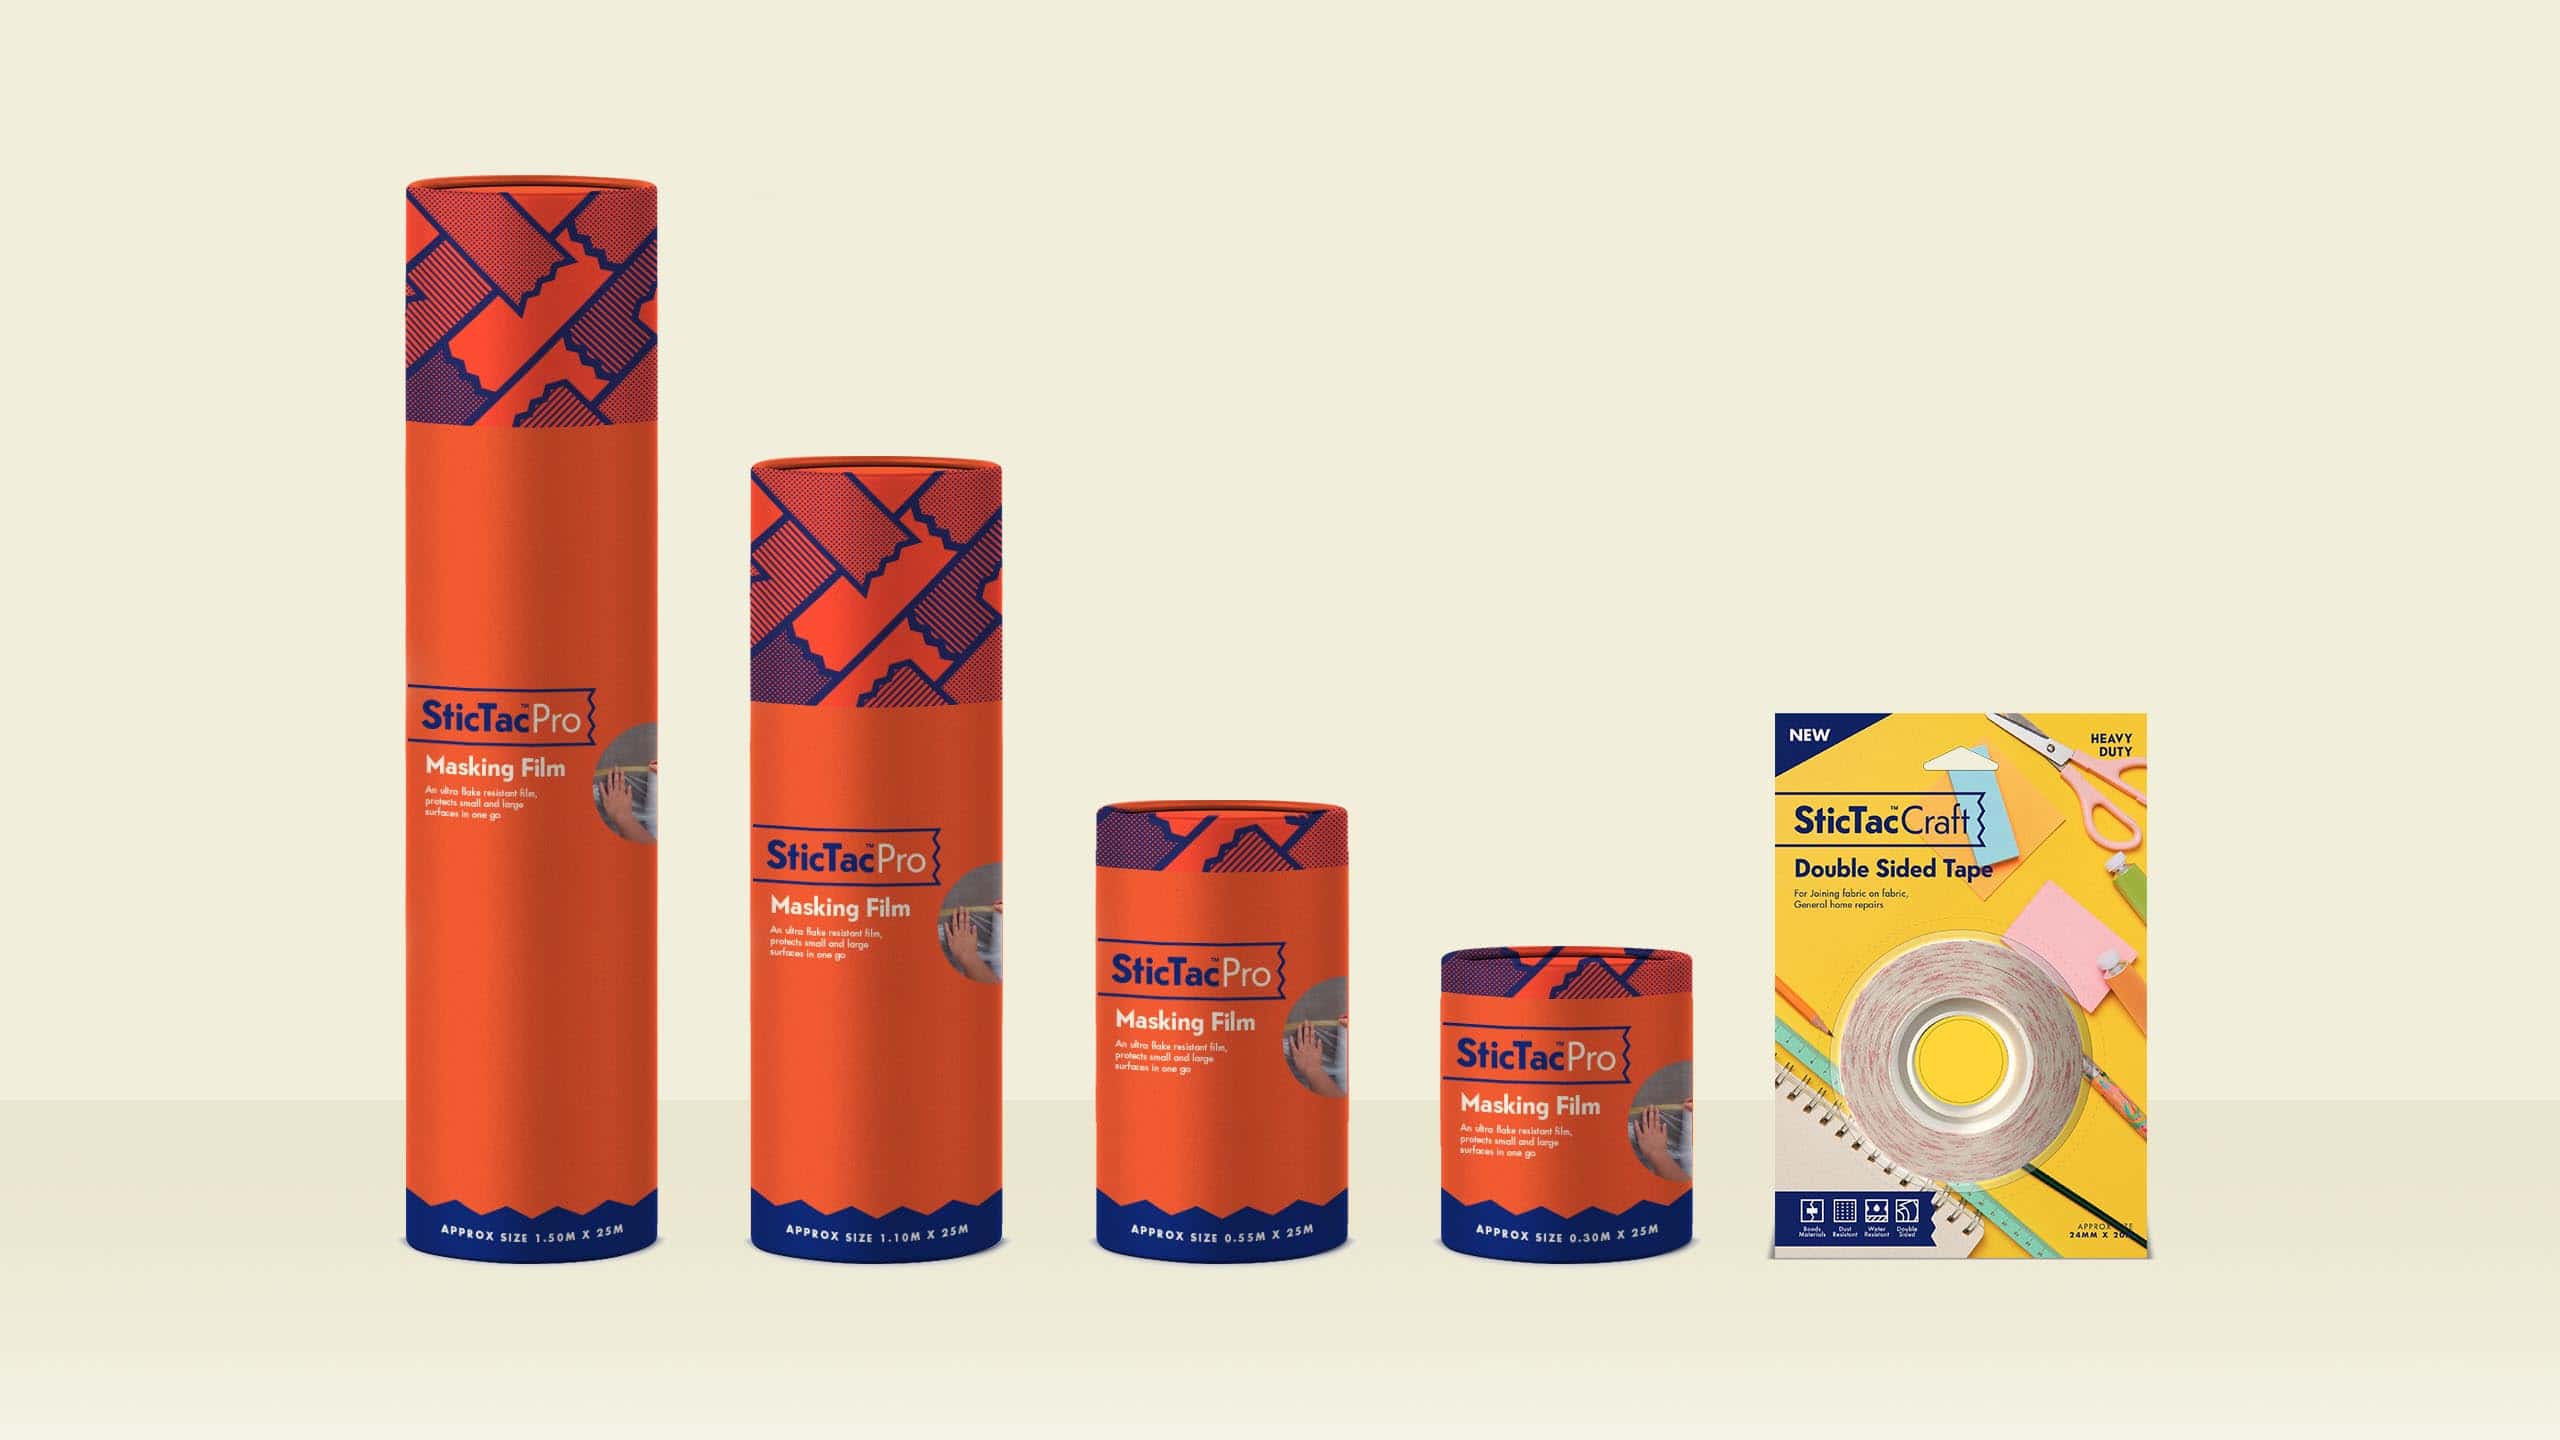 Packaging and product photos for SticTac Pro's masking film and StickTac Craft's double sided tape